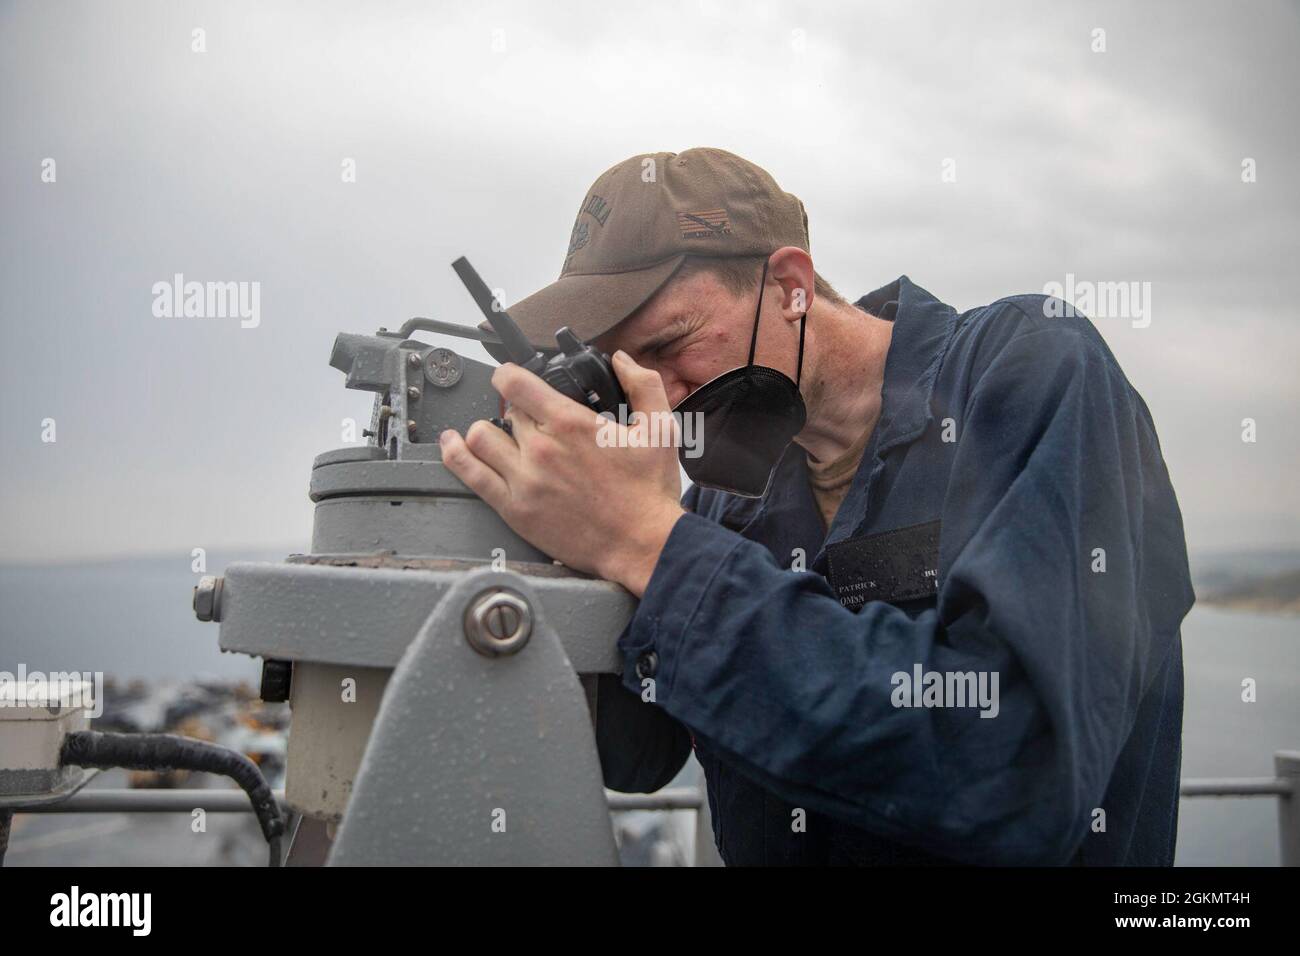 210530-N-LN075-1044  MEDITERRANEAN SEA (May 30, 2021) Quartermaster Seaman Patrick Buza, assigned to the Wasp-class amphibious assault ship USS Iwo Jima (LHD 7), gathers the bearings of surface contacts using a telescopic alidade during a sea and anchor evolution, May 30, 2021. Iwo Jima is underway in the Mediterranean Sea with Amphibious Squadron 4 and the 24th Marine Expeditionary Unit (MEU) as part of the Iwo Jima Amphibious Ready Group. Stock Photo